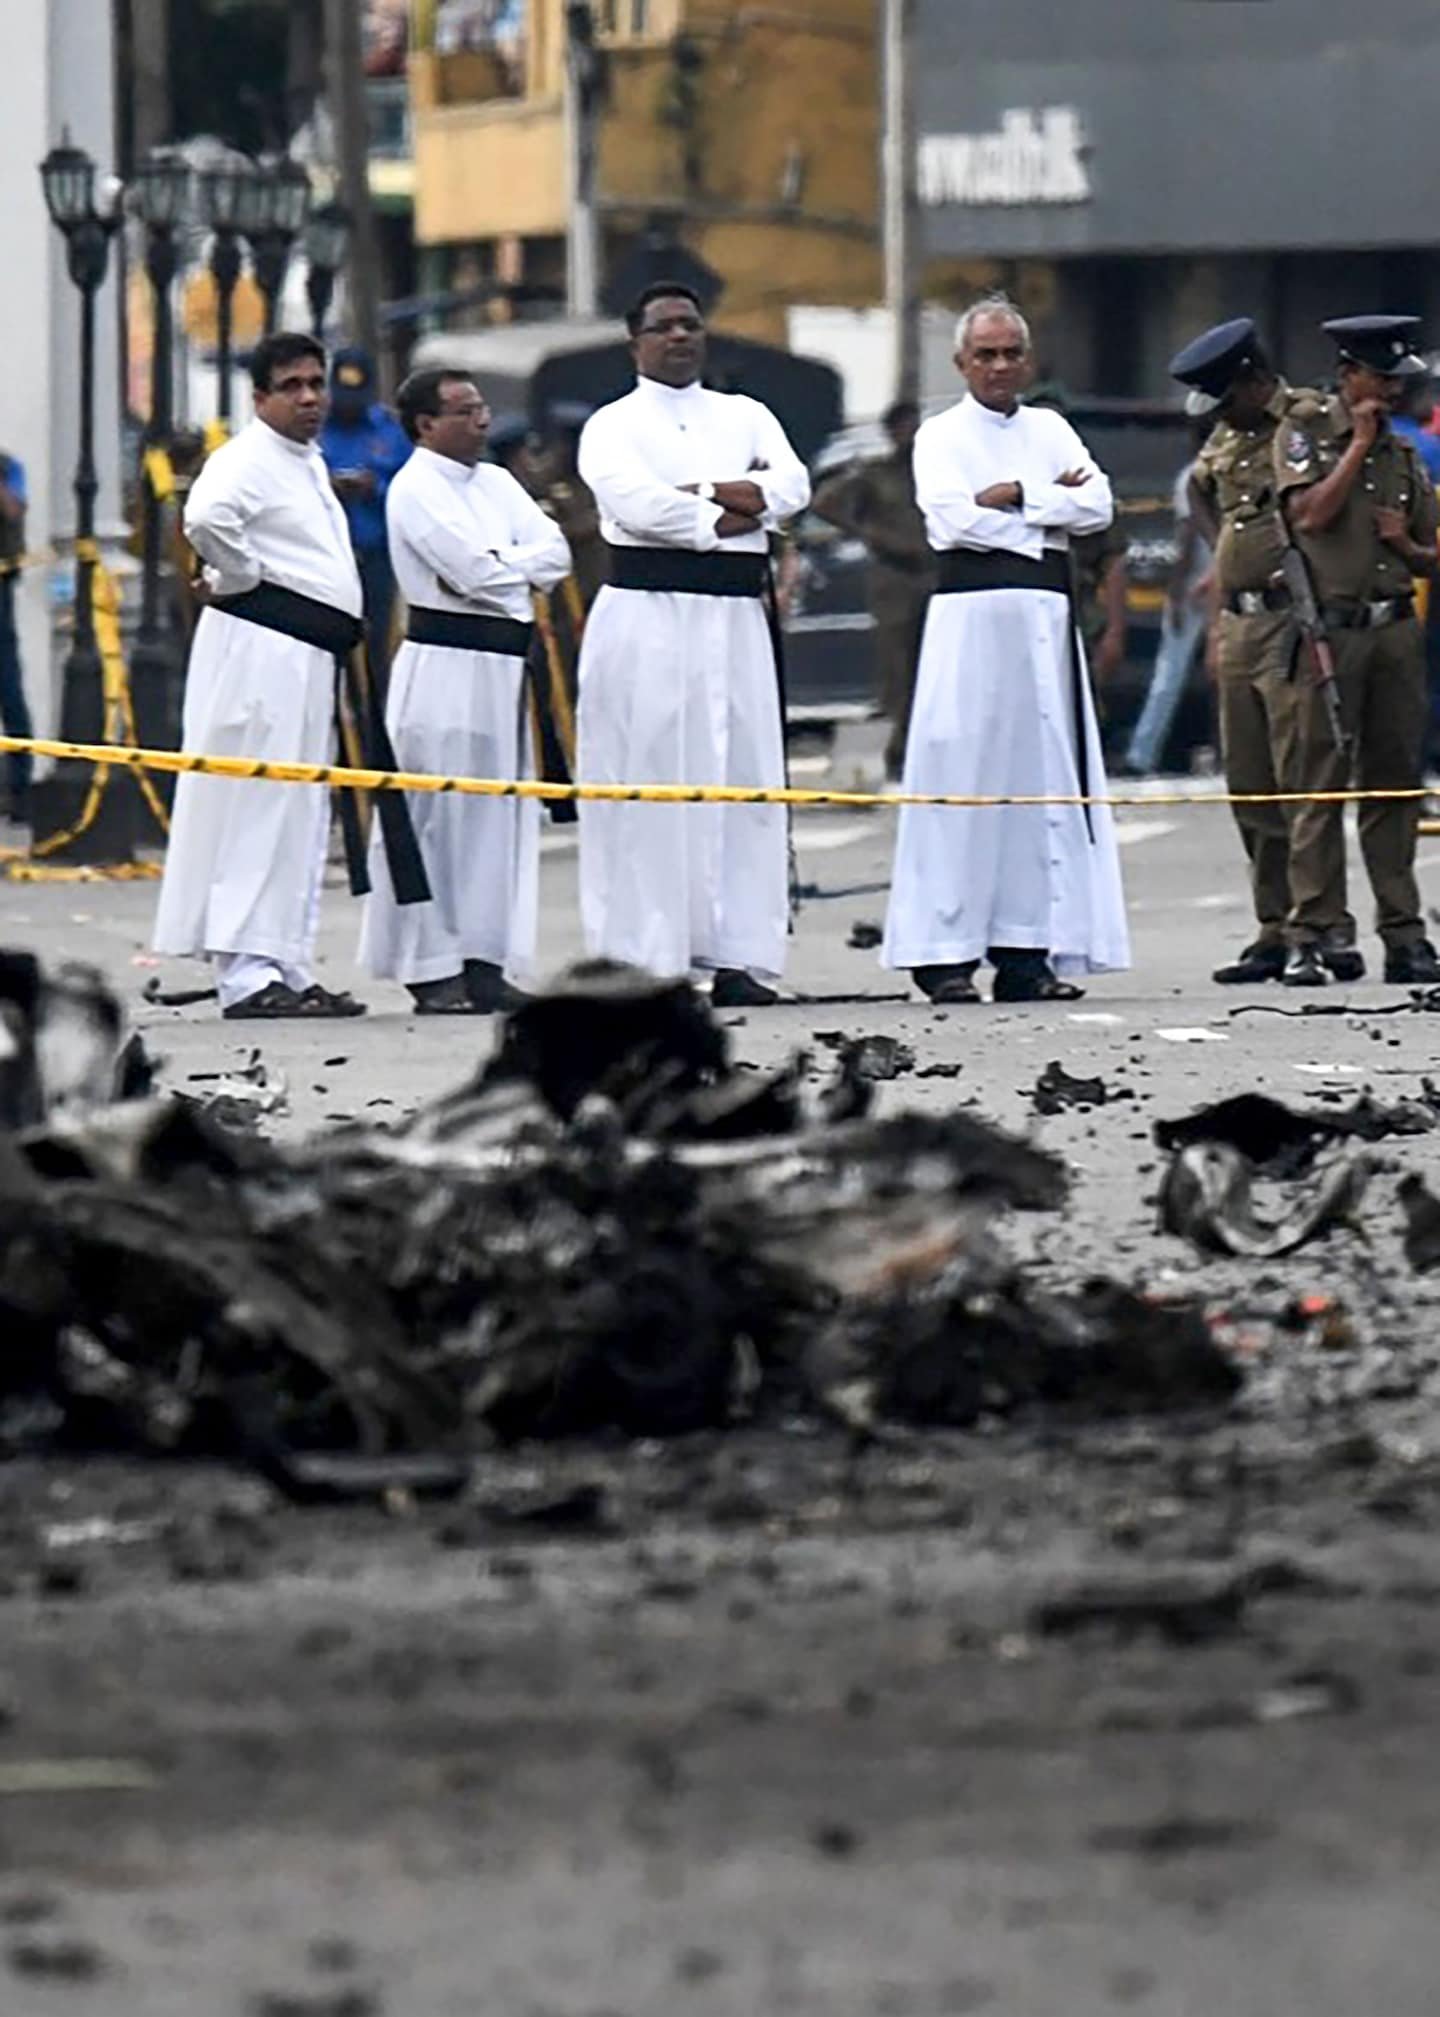 What happened in Sri Lanka? Here’s what you need to know.